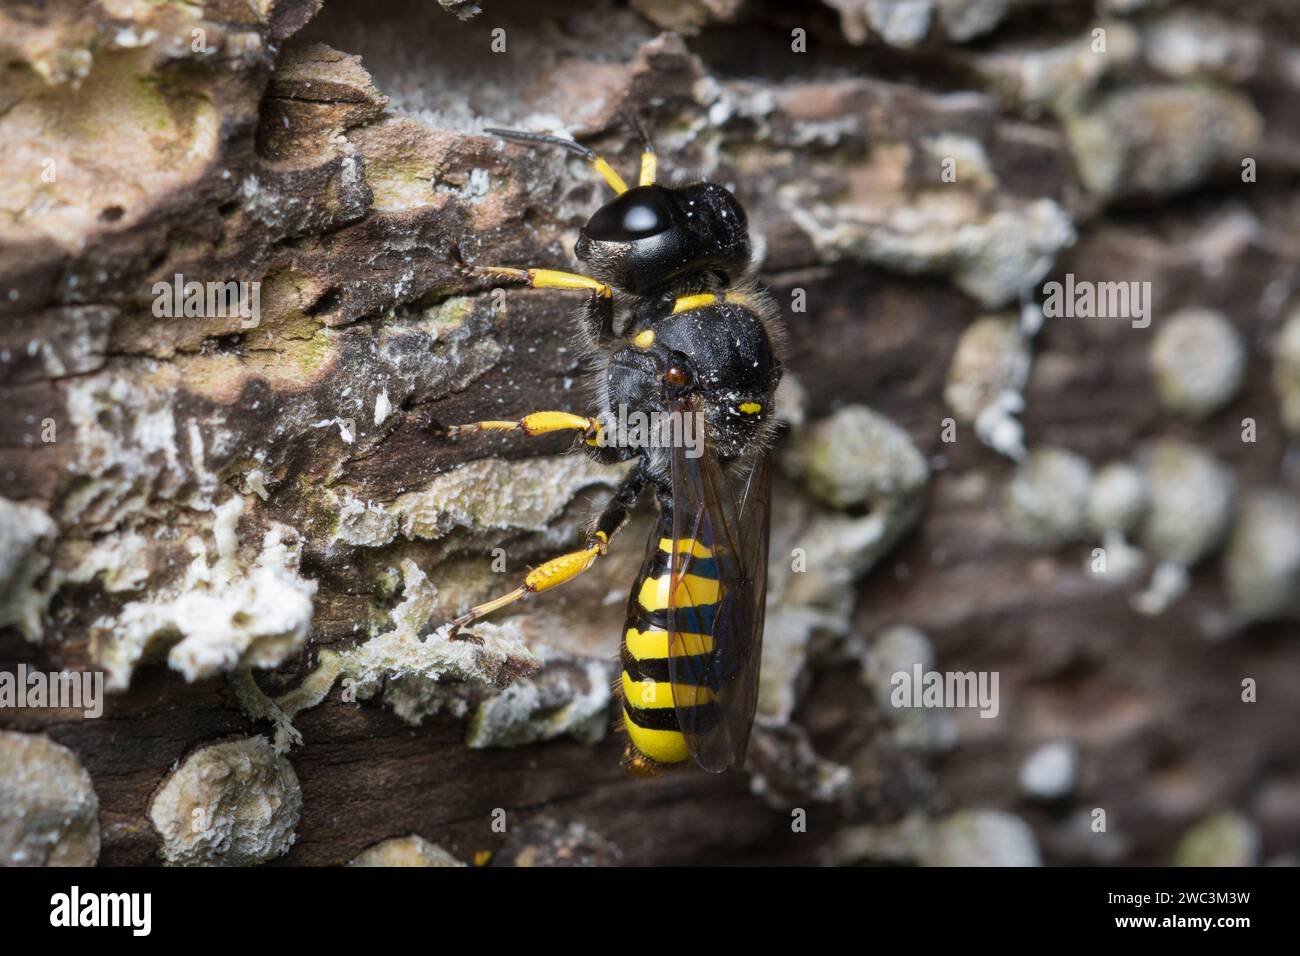 A female solitary wasp (Ectemnius sp) returning to her nest in a rotting log. Photographed in Sunderland, North East England. Stock Photo